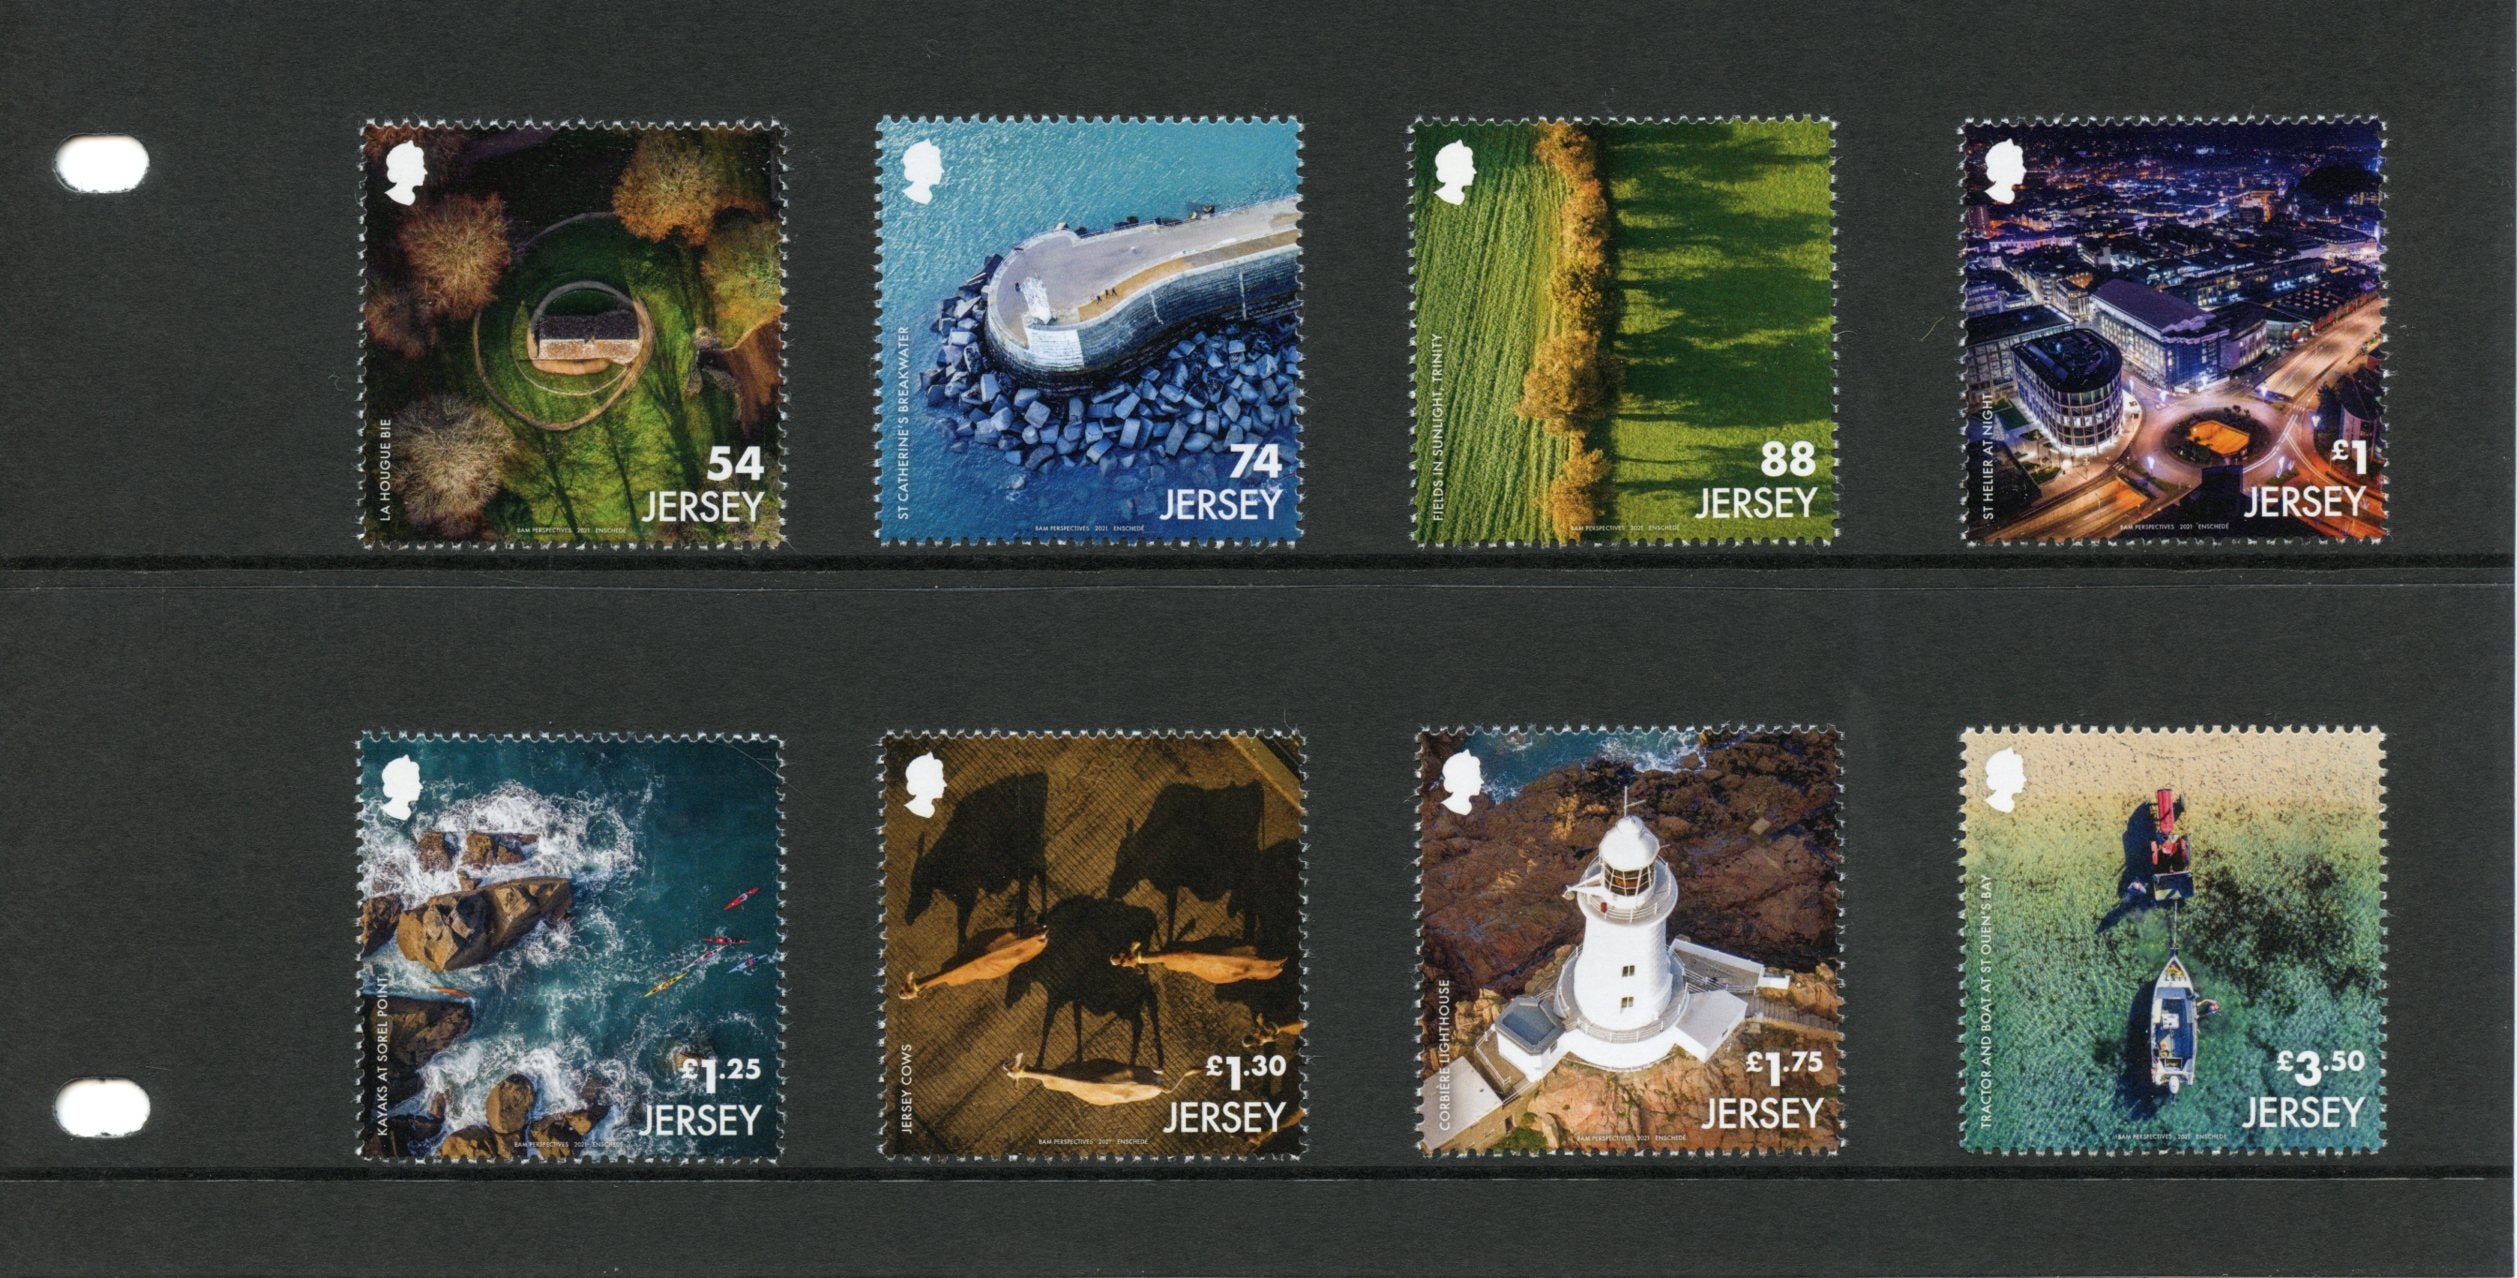 Jersey 2021 MNH Landscapes Stamps From the Air Lighthouses Tourism Cows 8v Set P/P